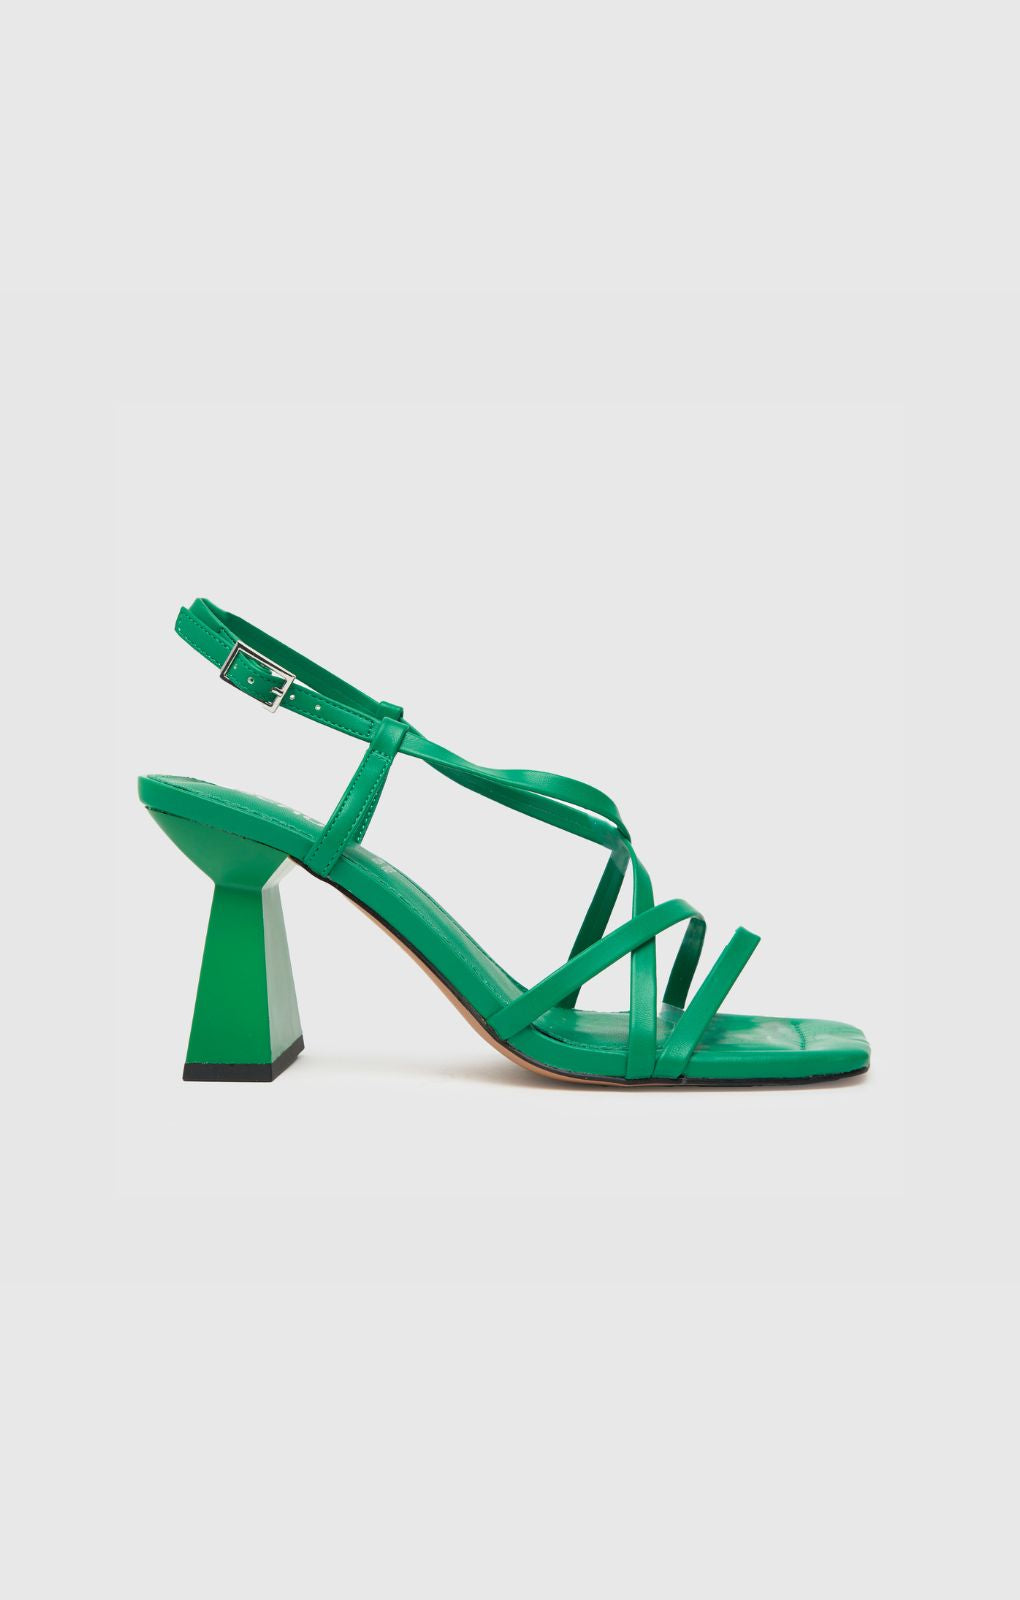 Schuh Scarlett Flared Block High Heels in Green product image